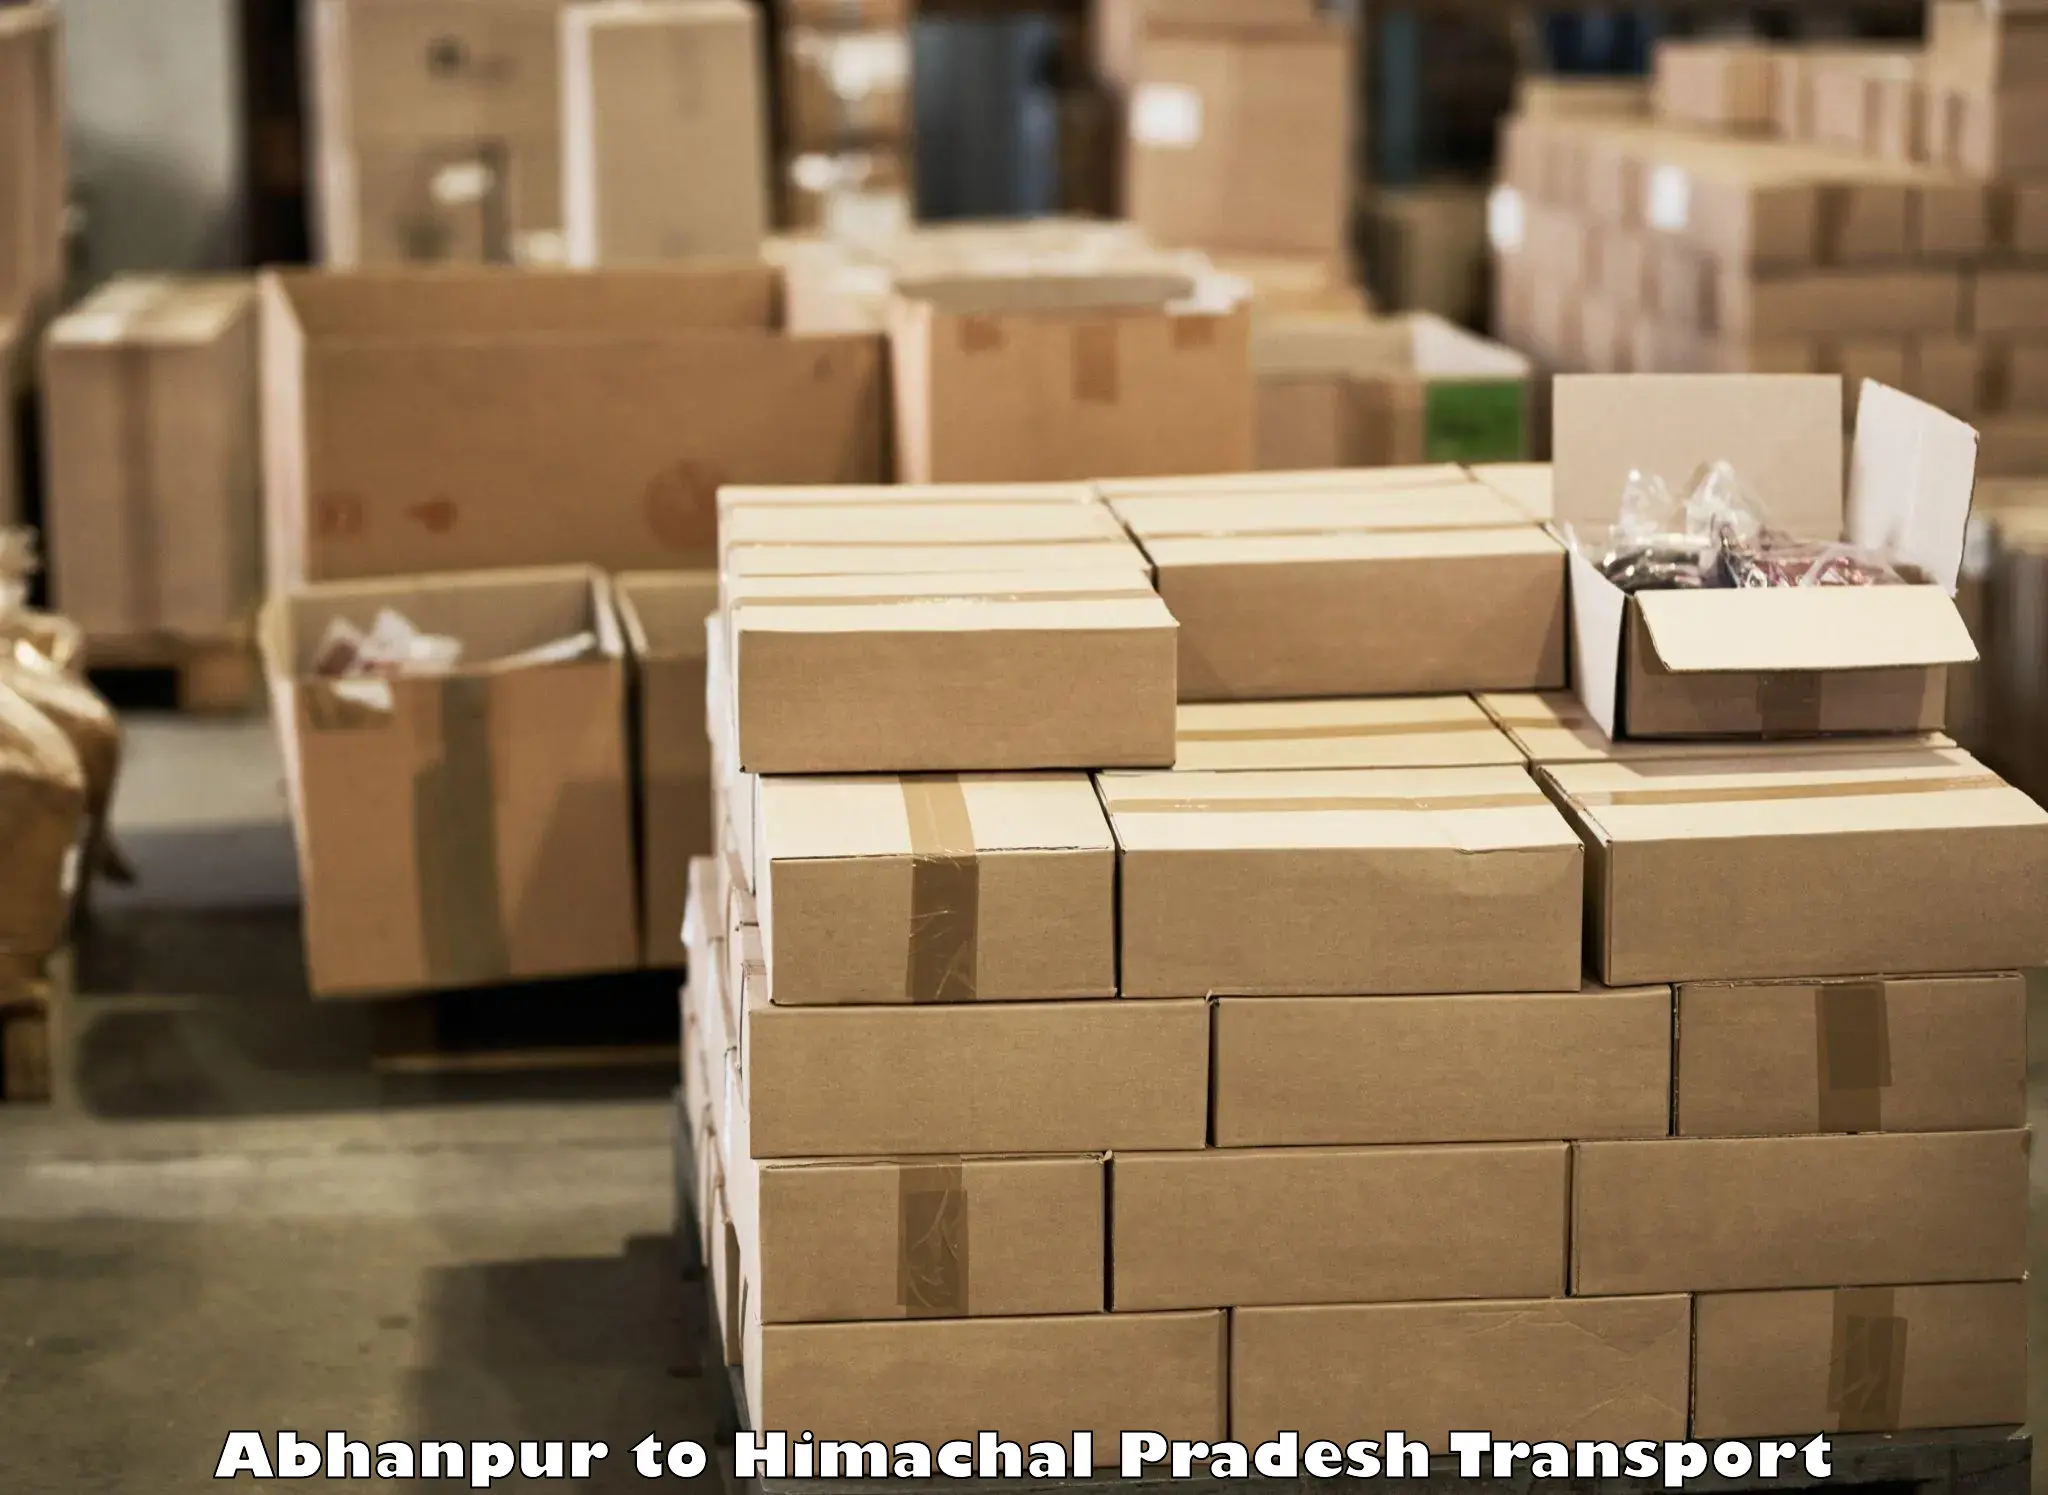 Air freight transport services in Abhanpur to Jubbal